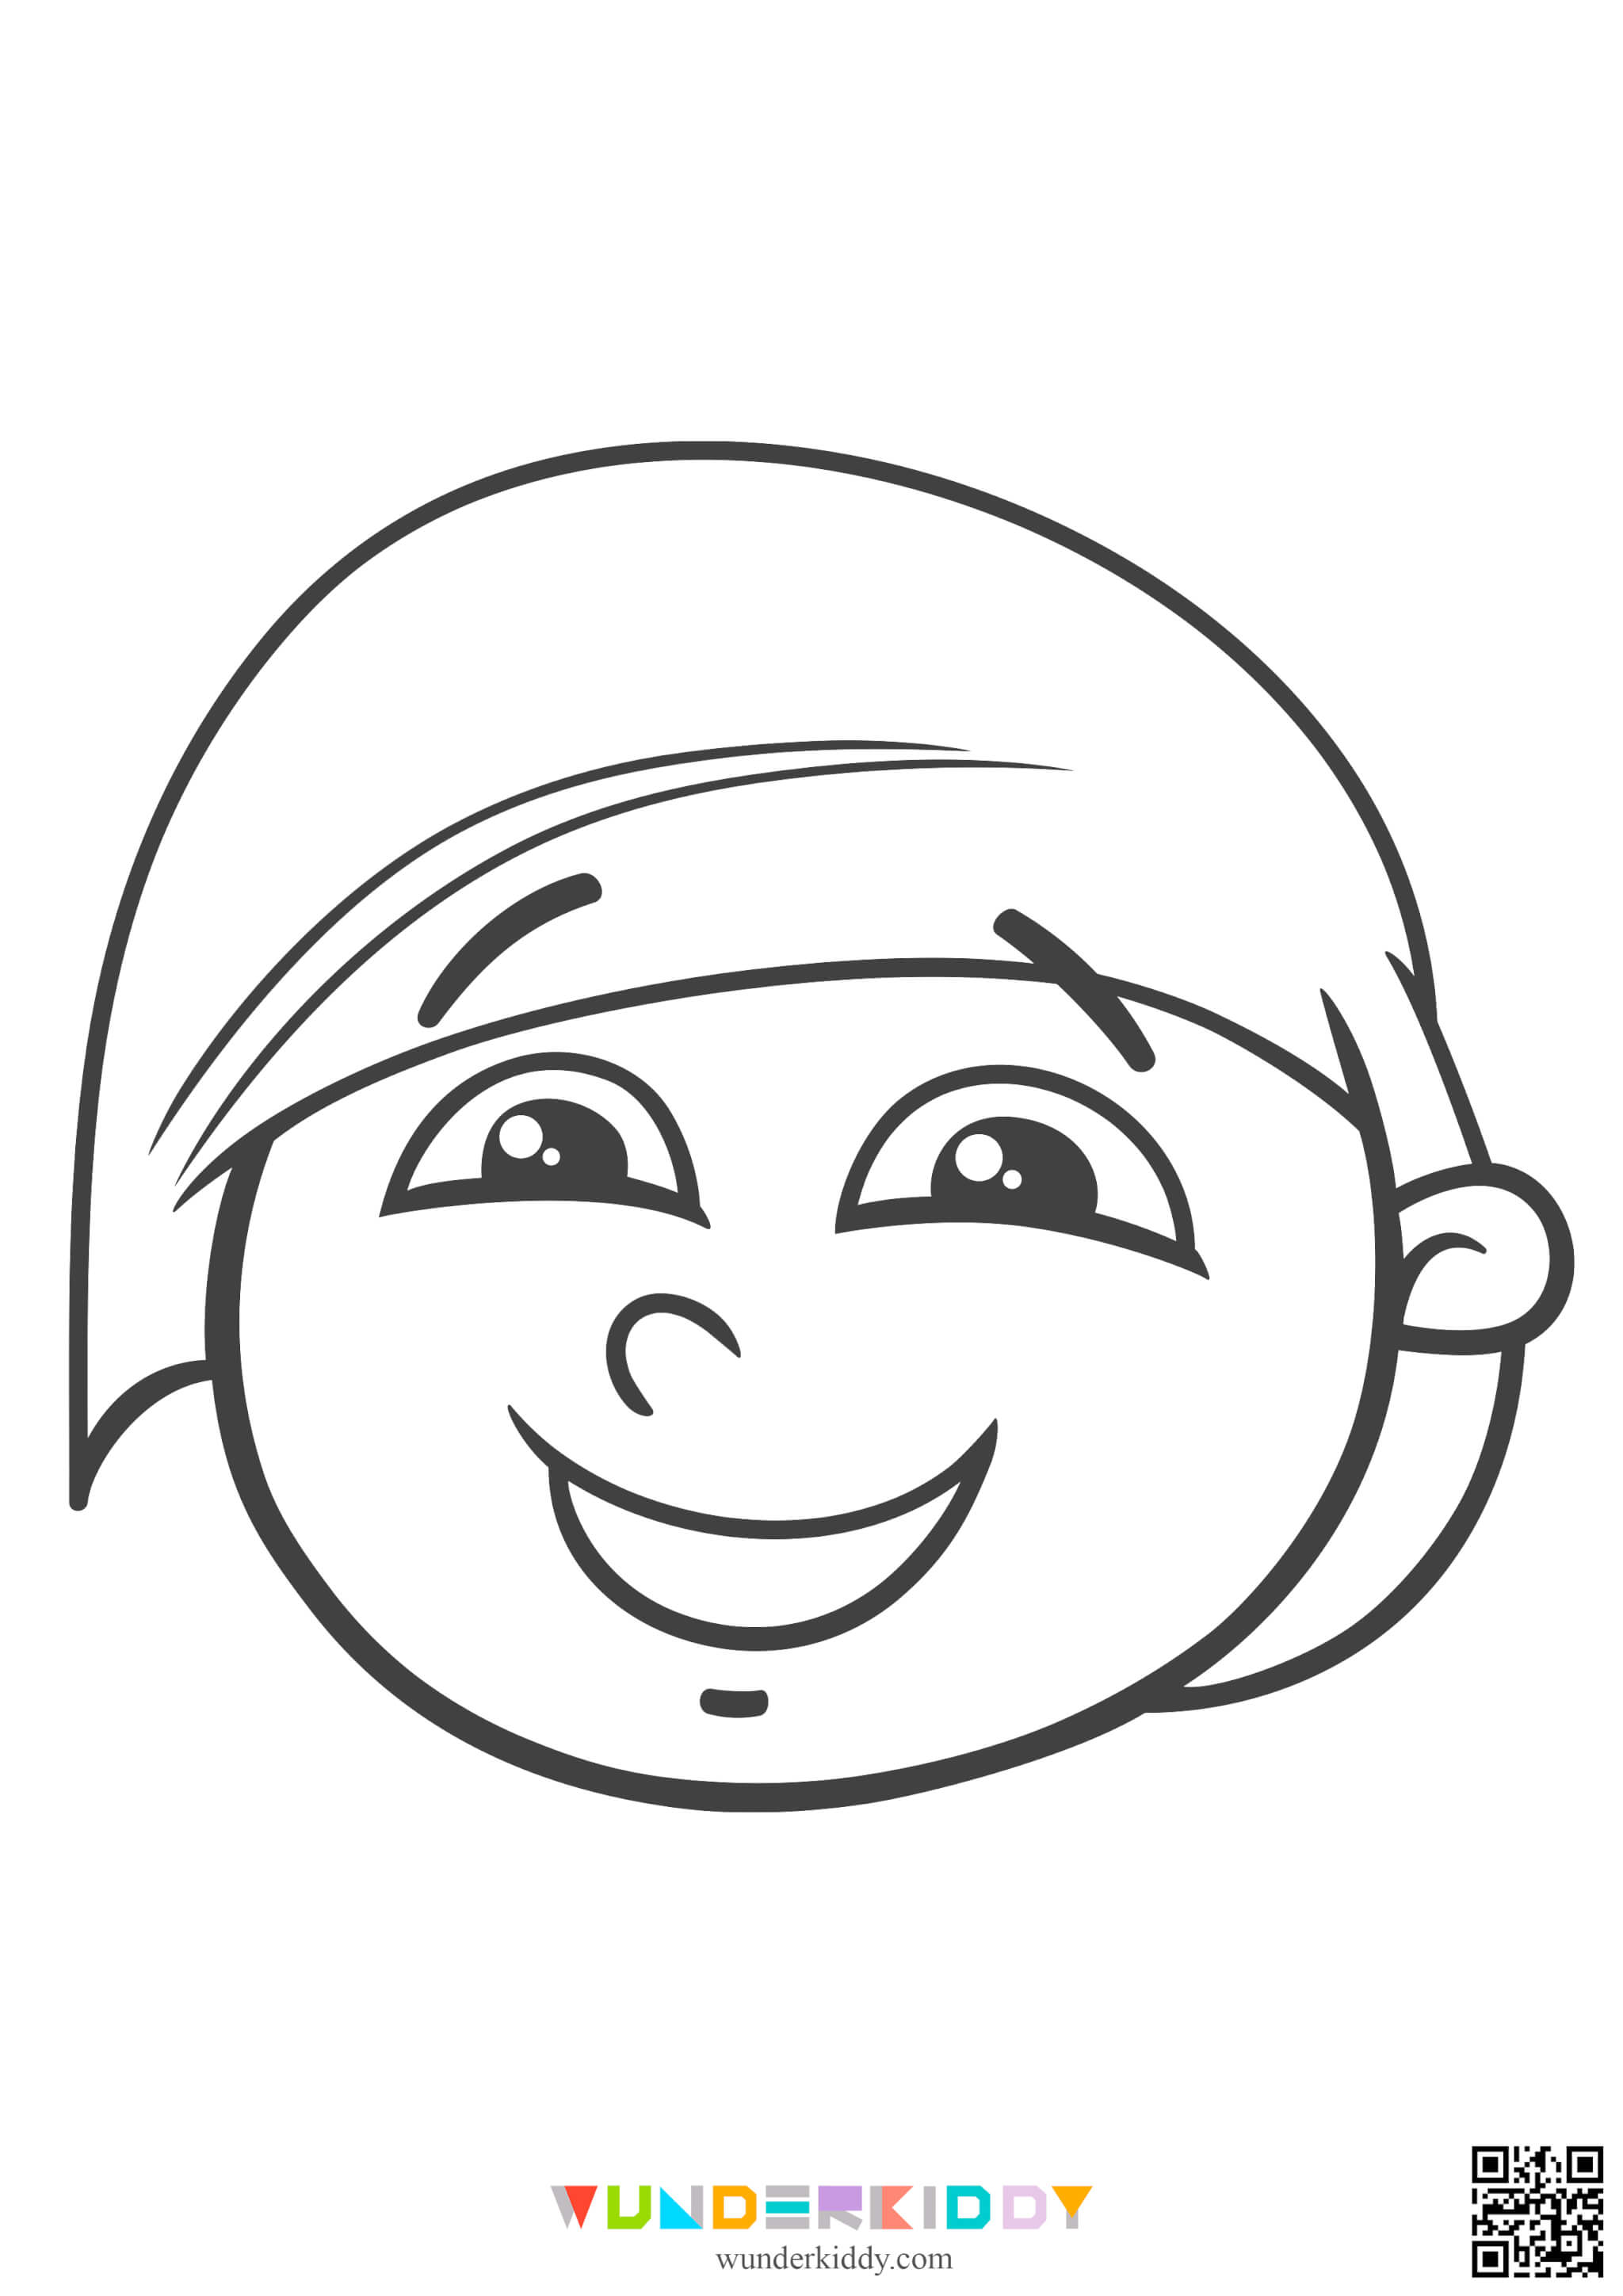 Face Coloring Page - Image 10